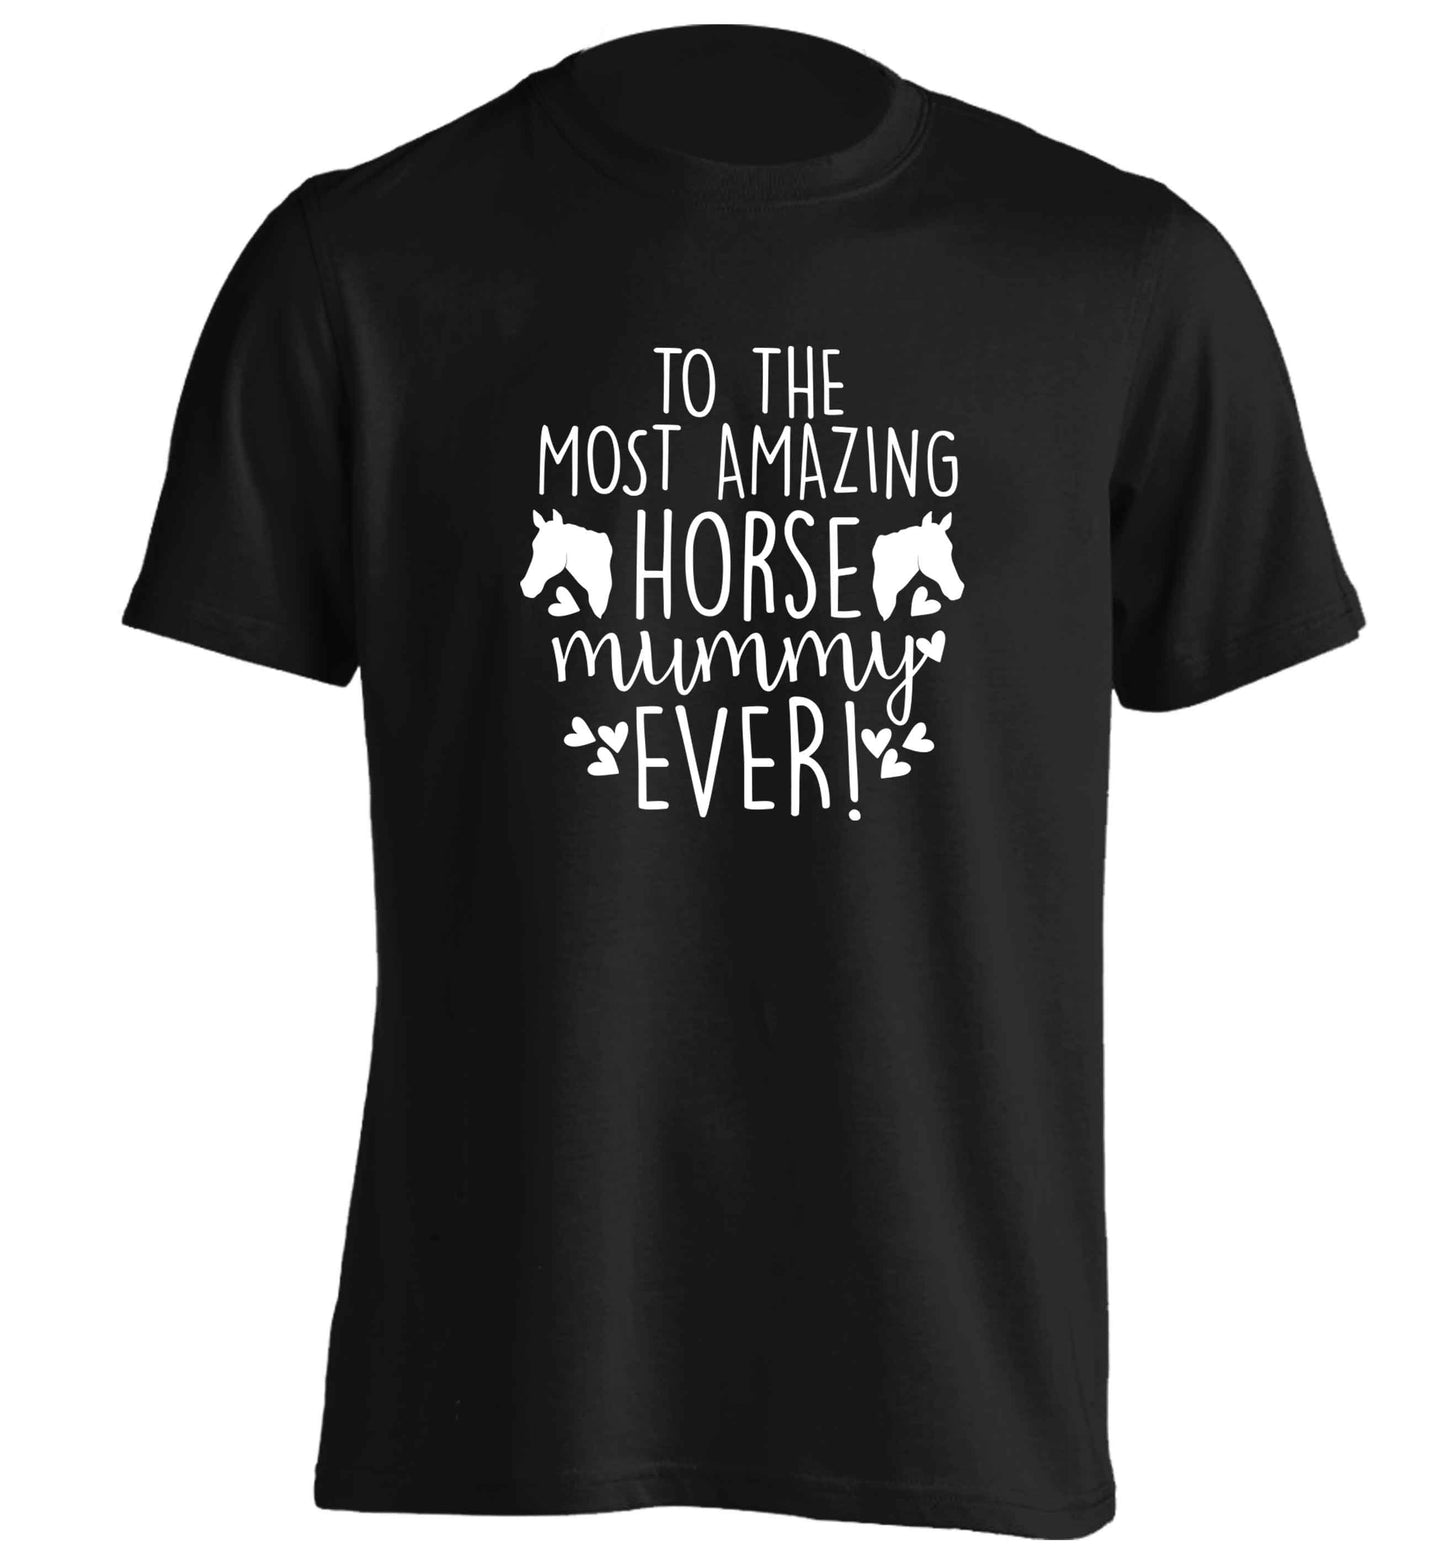 To the most amazing horse mummy ever! adults unisex black Tshirt 2XL